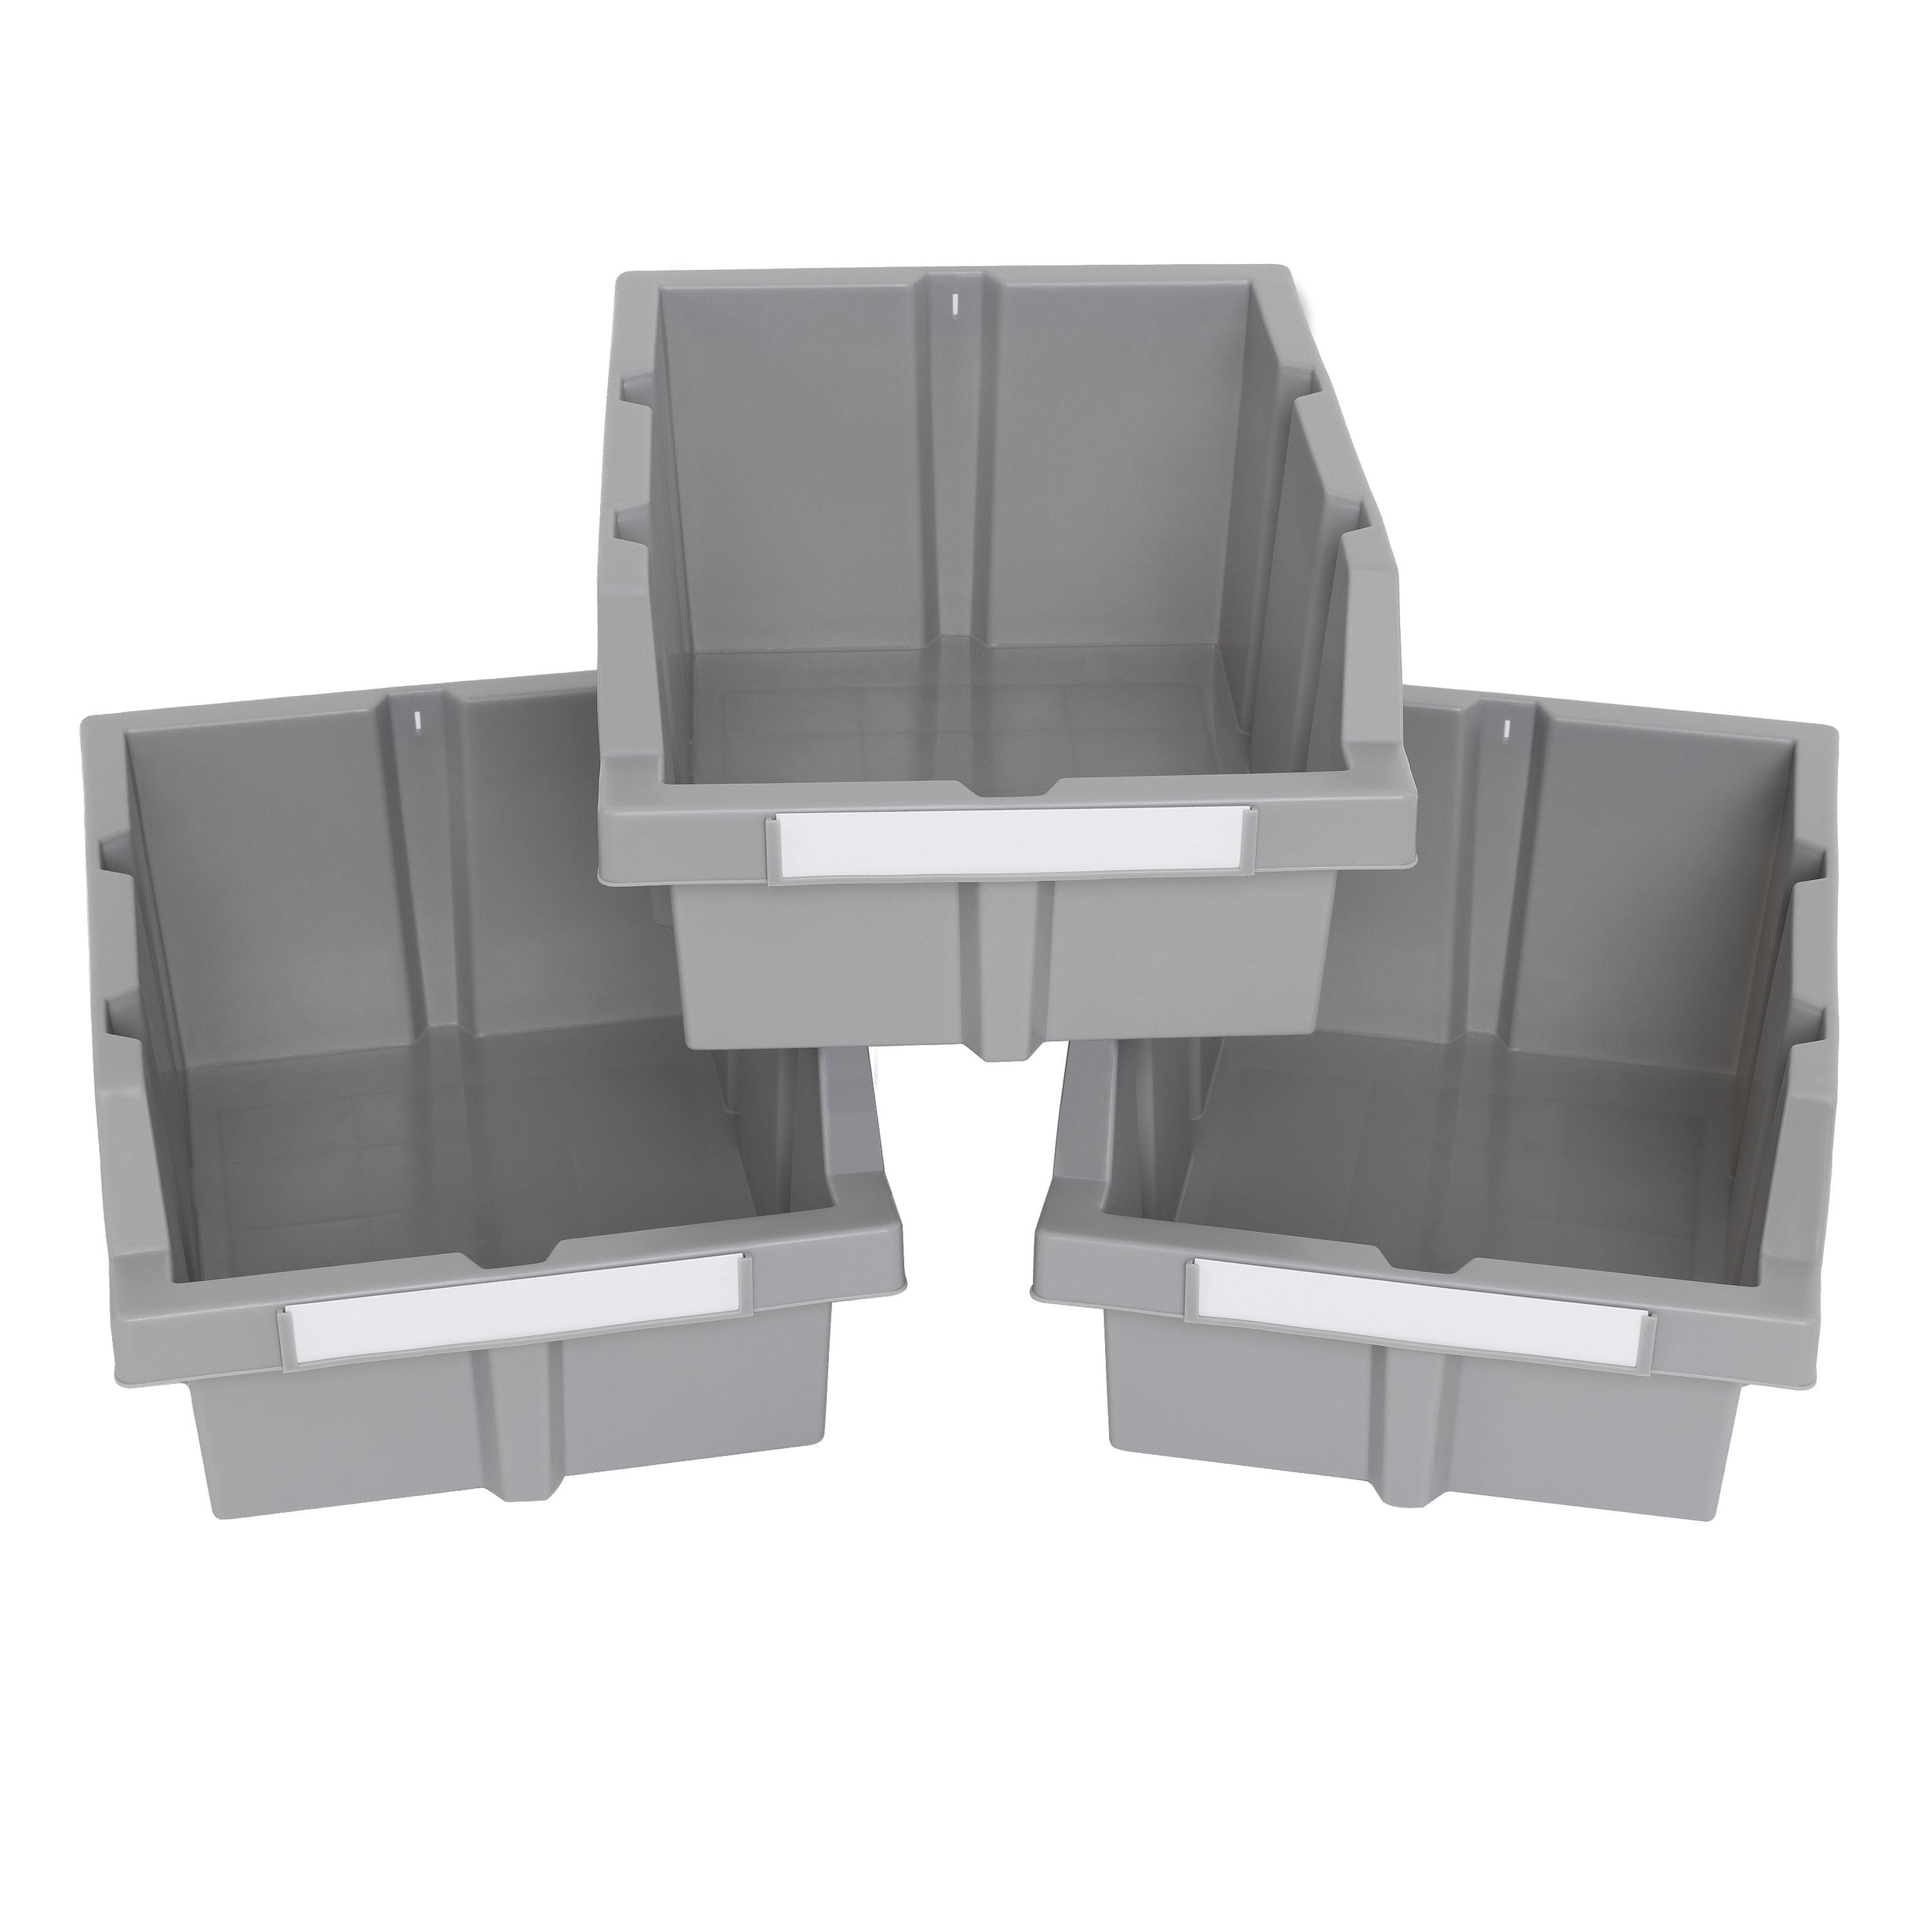 Gray Small Plastic Storage Bin 6 Pack - by TCR